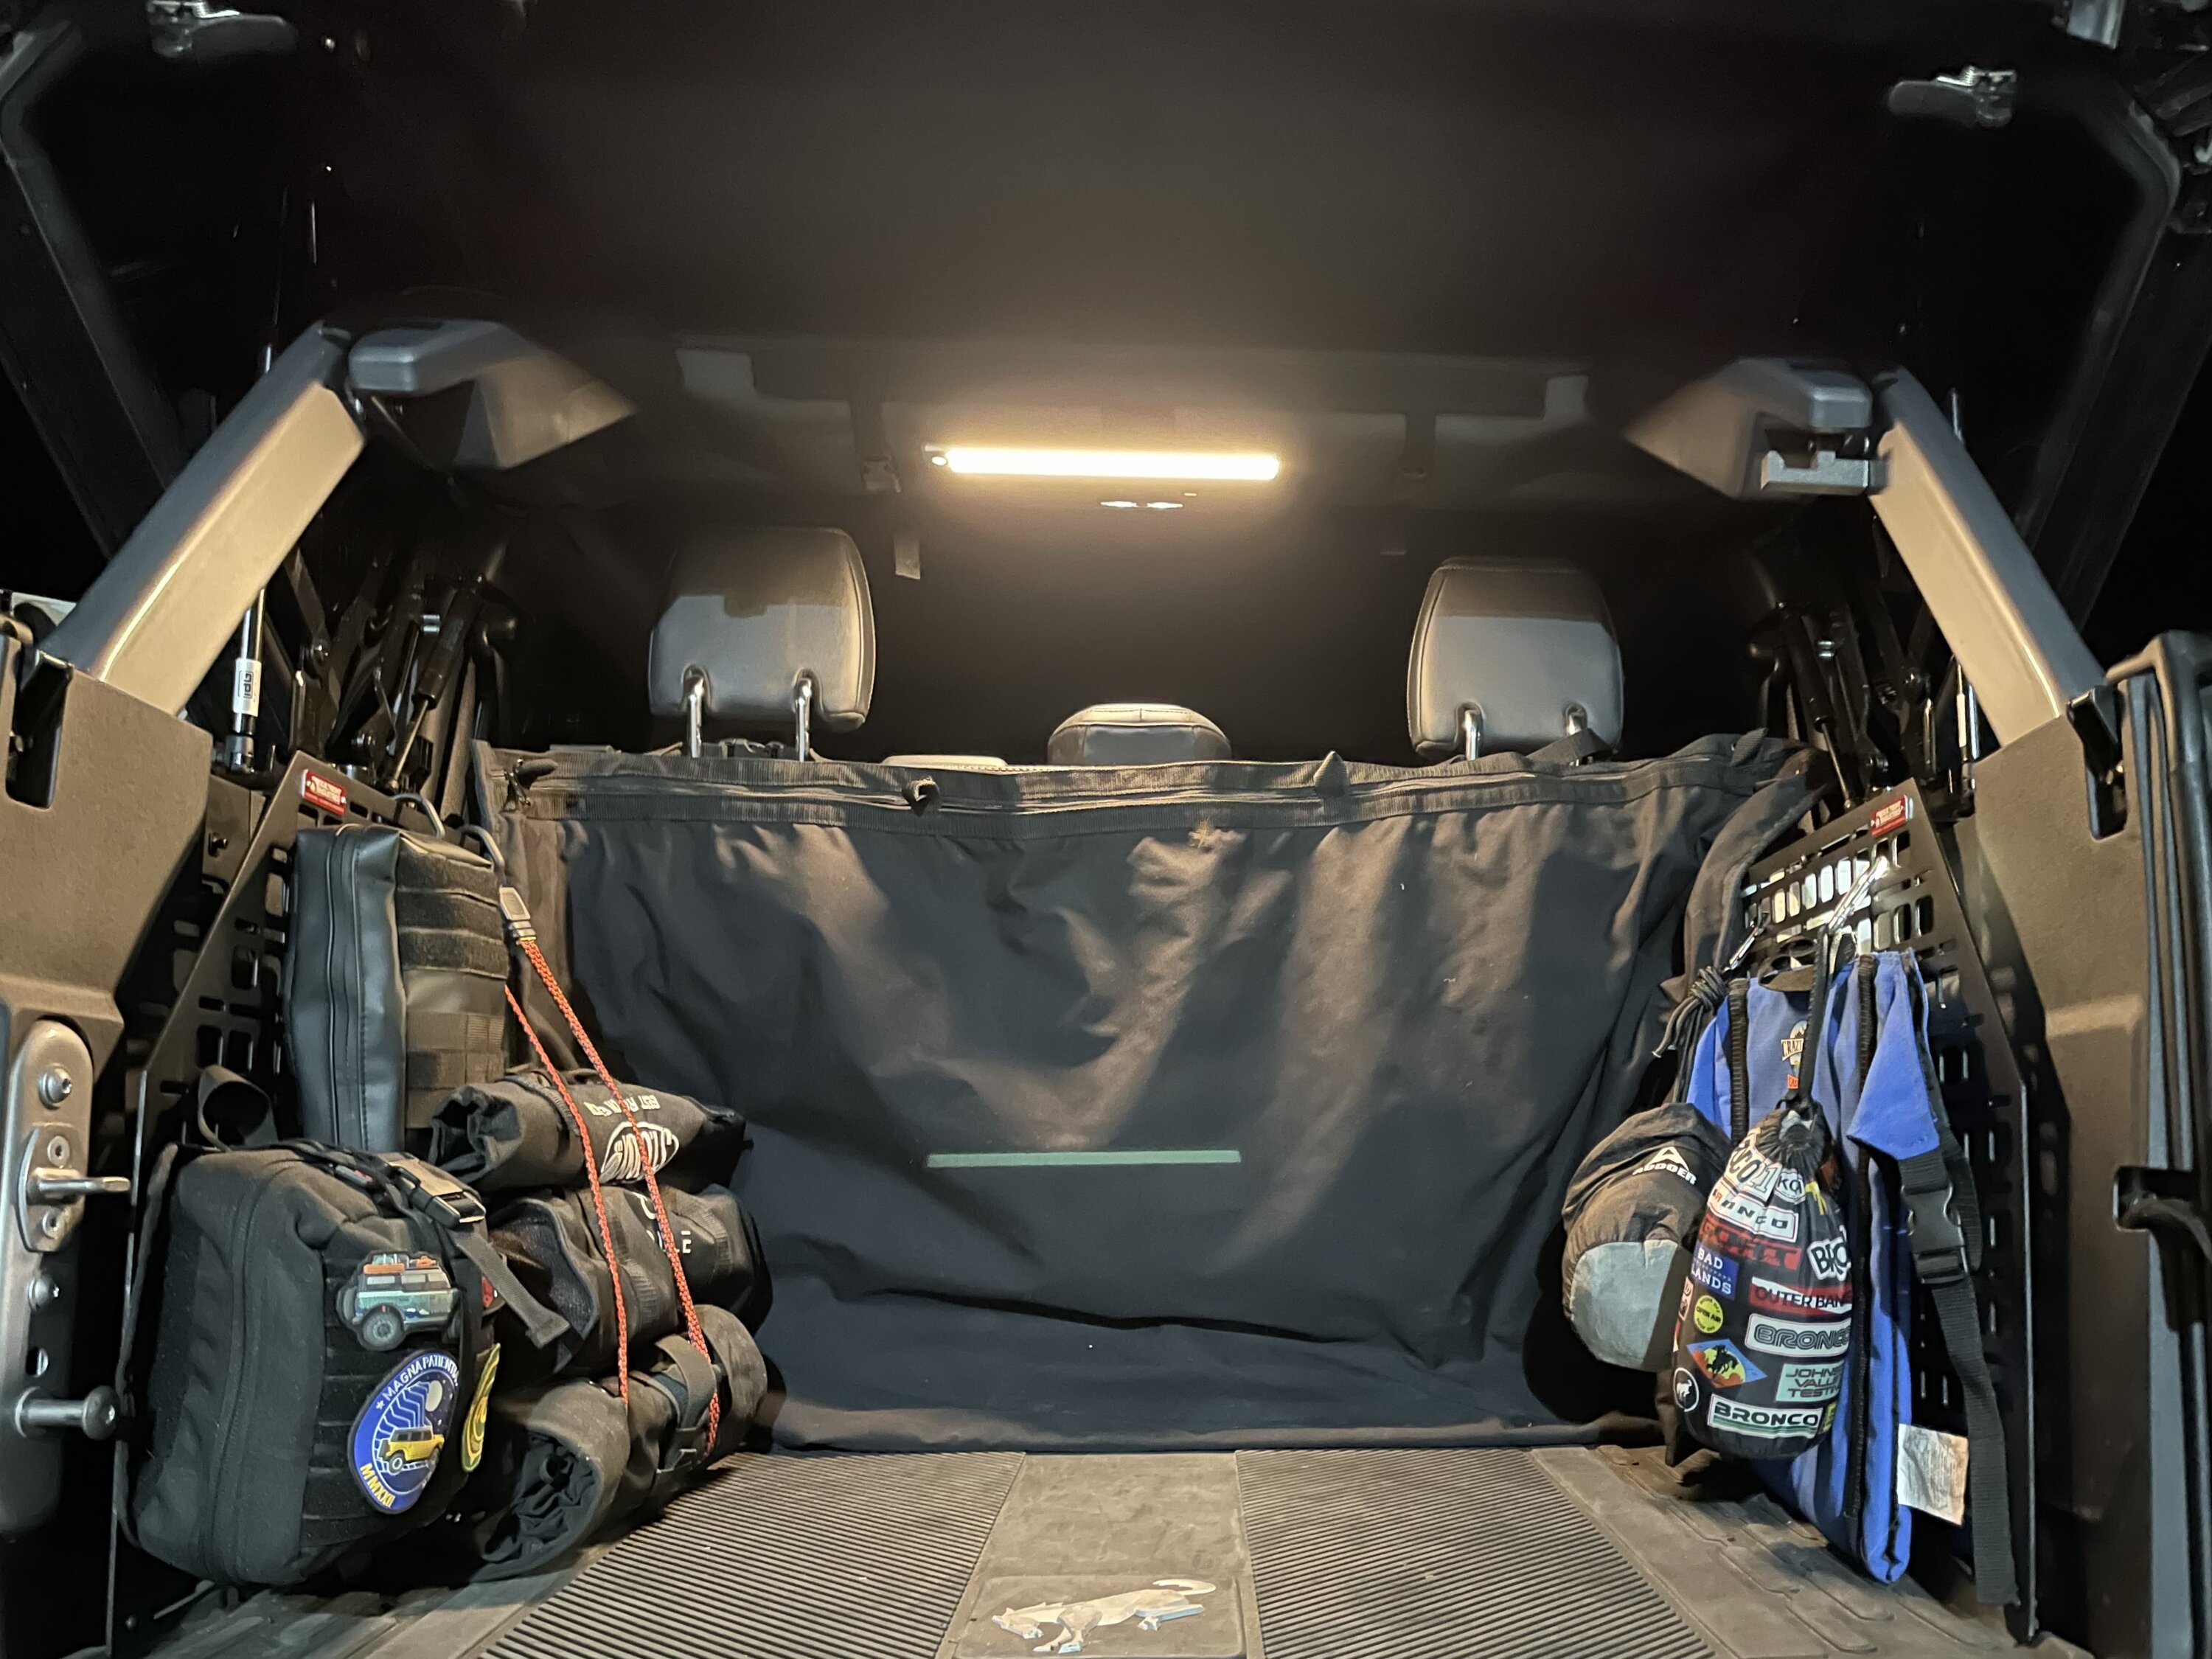 Ford Bronco BuiltRight Industries - Cargo Area MOLLE System - Seeking feedback! F9D0B26E-7091-44AF-8C18-7AFDC5EC6290